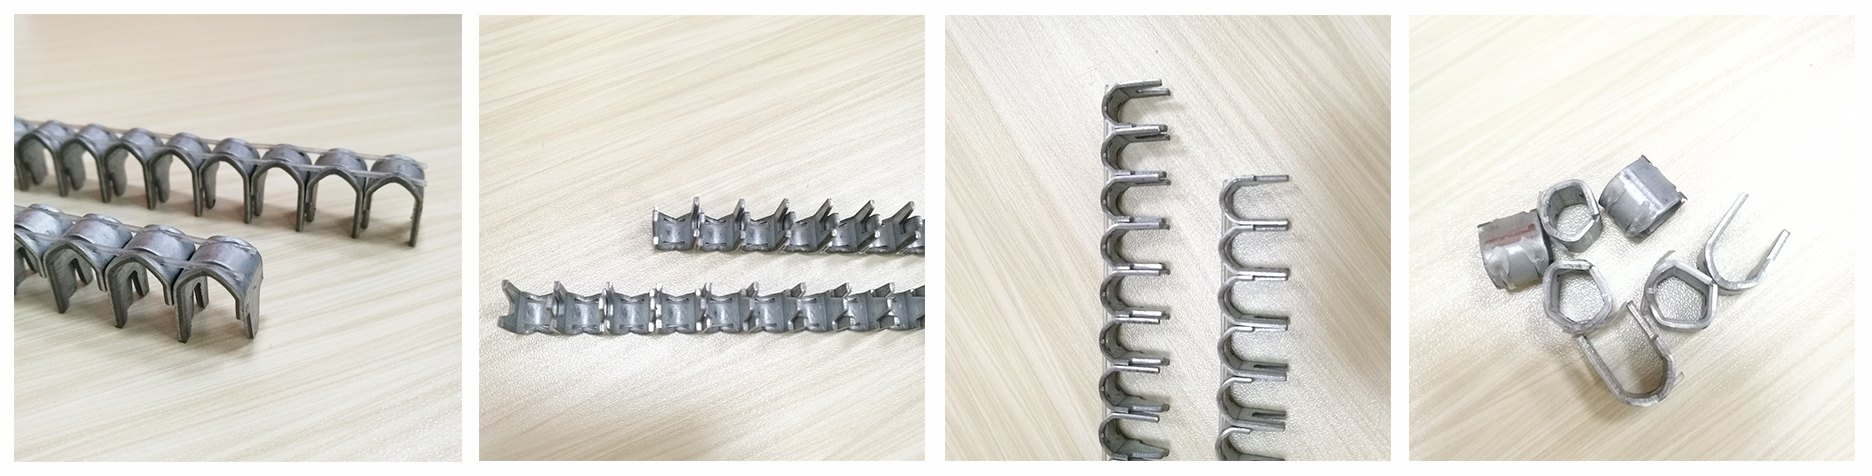 Galvanized Surface Treatment U Clips M87 connect razor barbed wires CBT-60